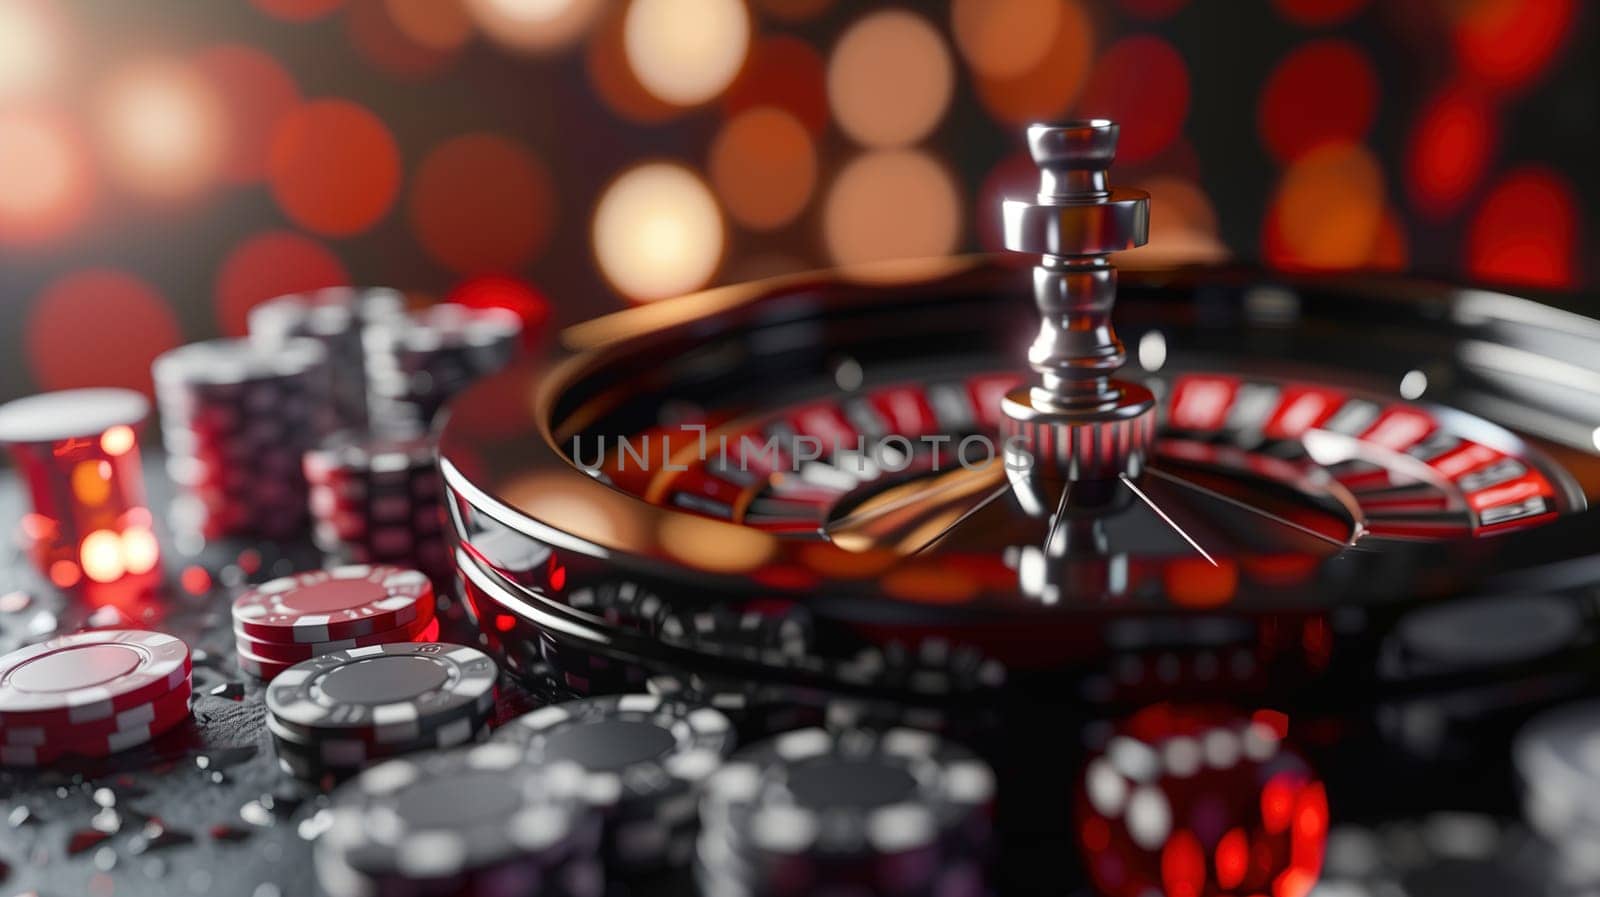 Spinning Casino Wheel Surrounded by Casino Chips by TRMK